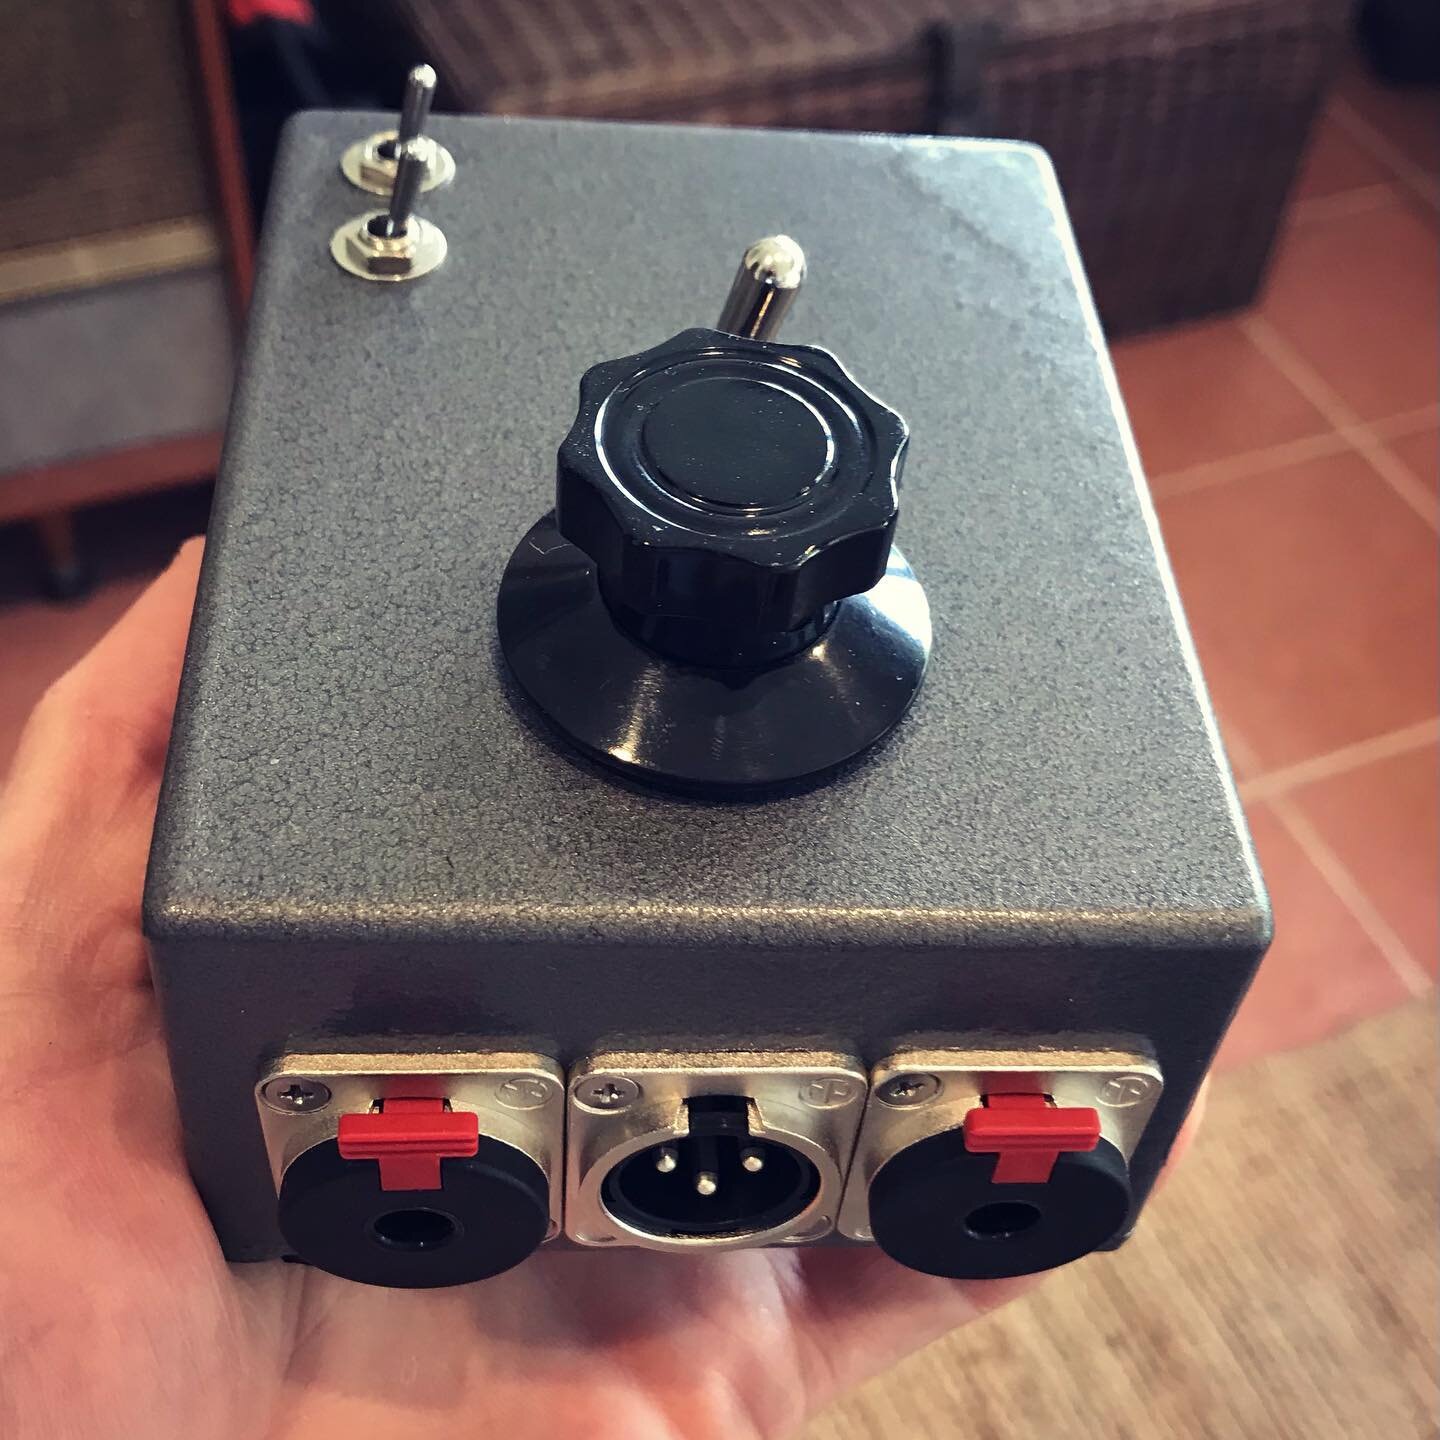 Just finished this one. Custom DI for @aceventoura featuring switchable transformers (vintage/boutique), stepped attenuator, locking jacks and a lovely paint job. Hi-Z output post transformers so the amp gets the vibe too! All passive 💃